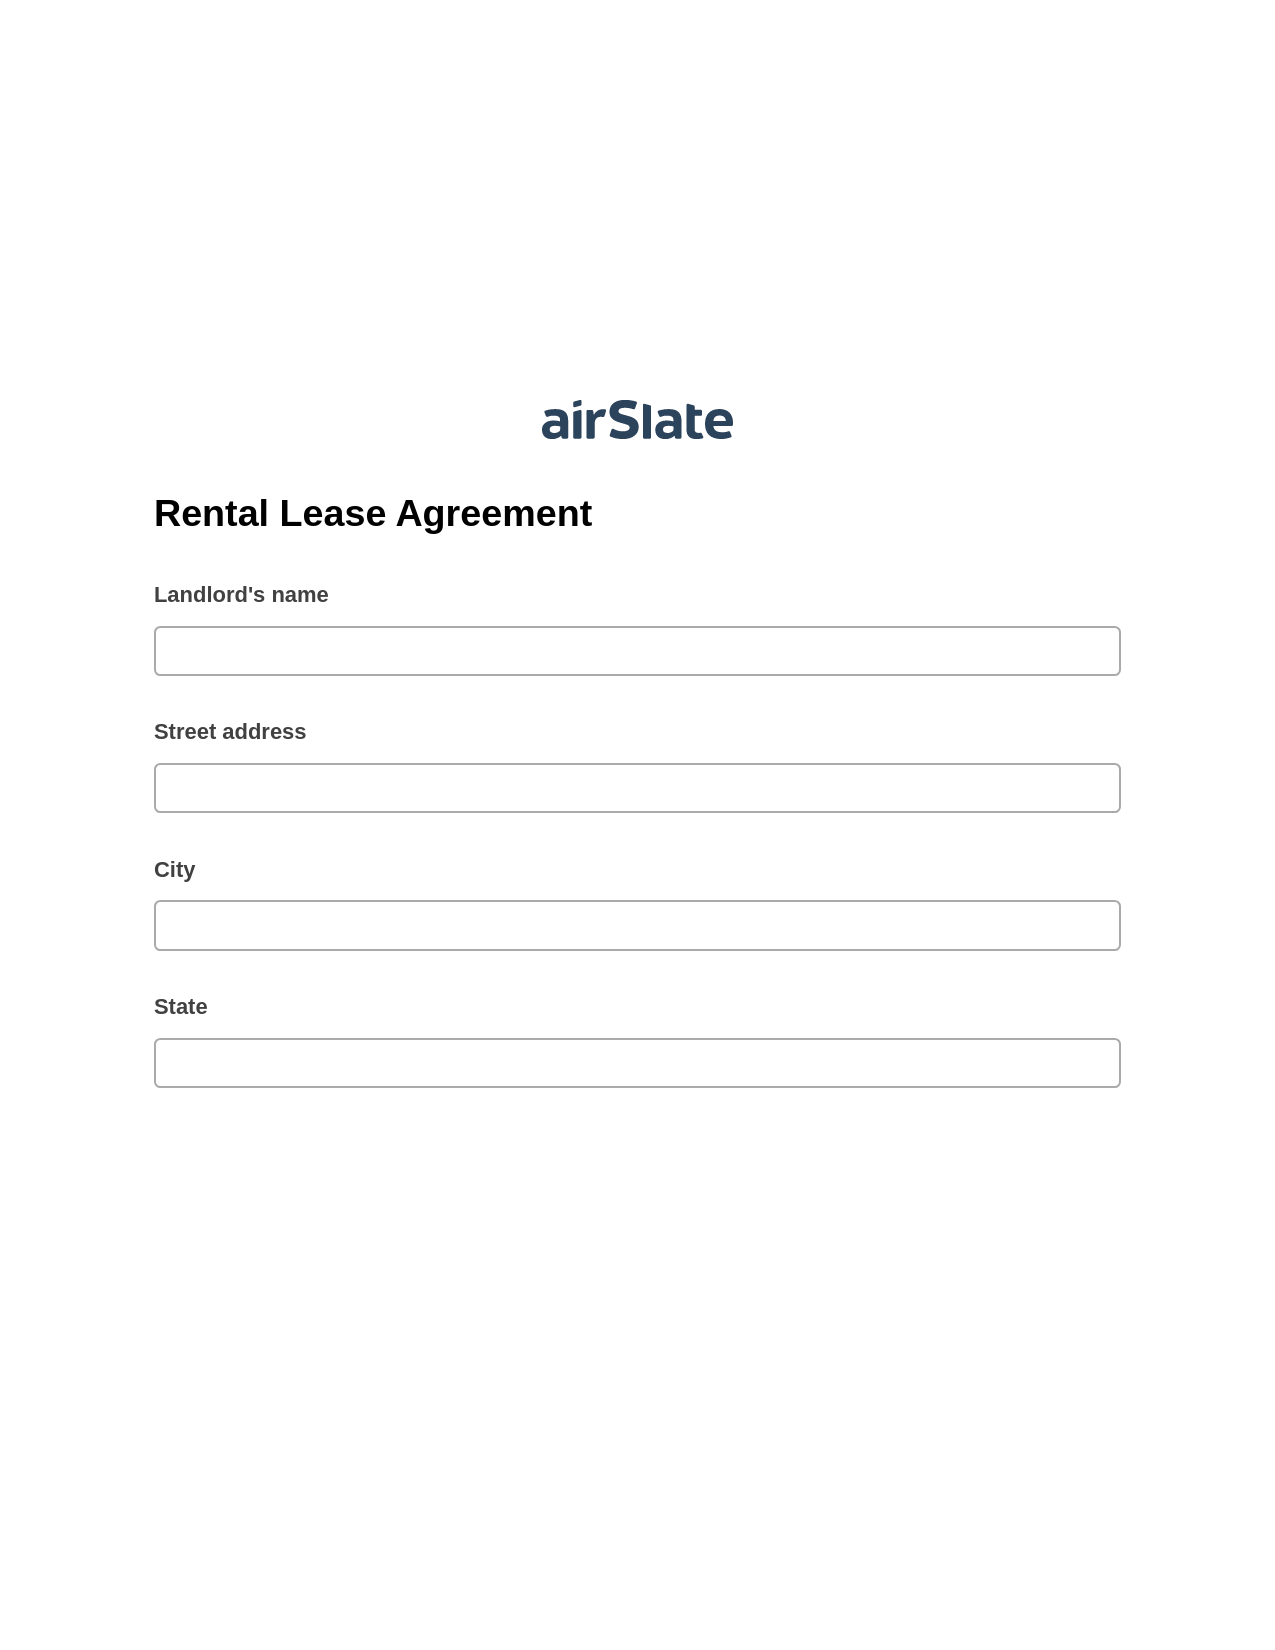 Rental Lease Agreement Pre-fill from another Slate Bot, Document Hide Bot, Export to Formstack Documents Bot